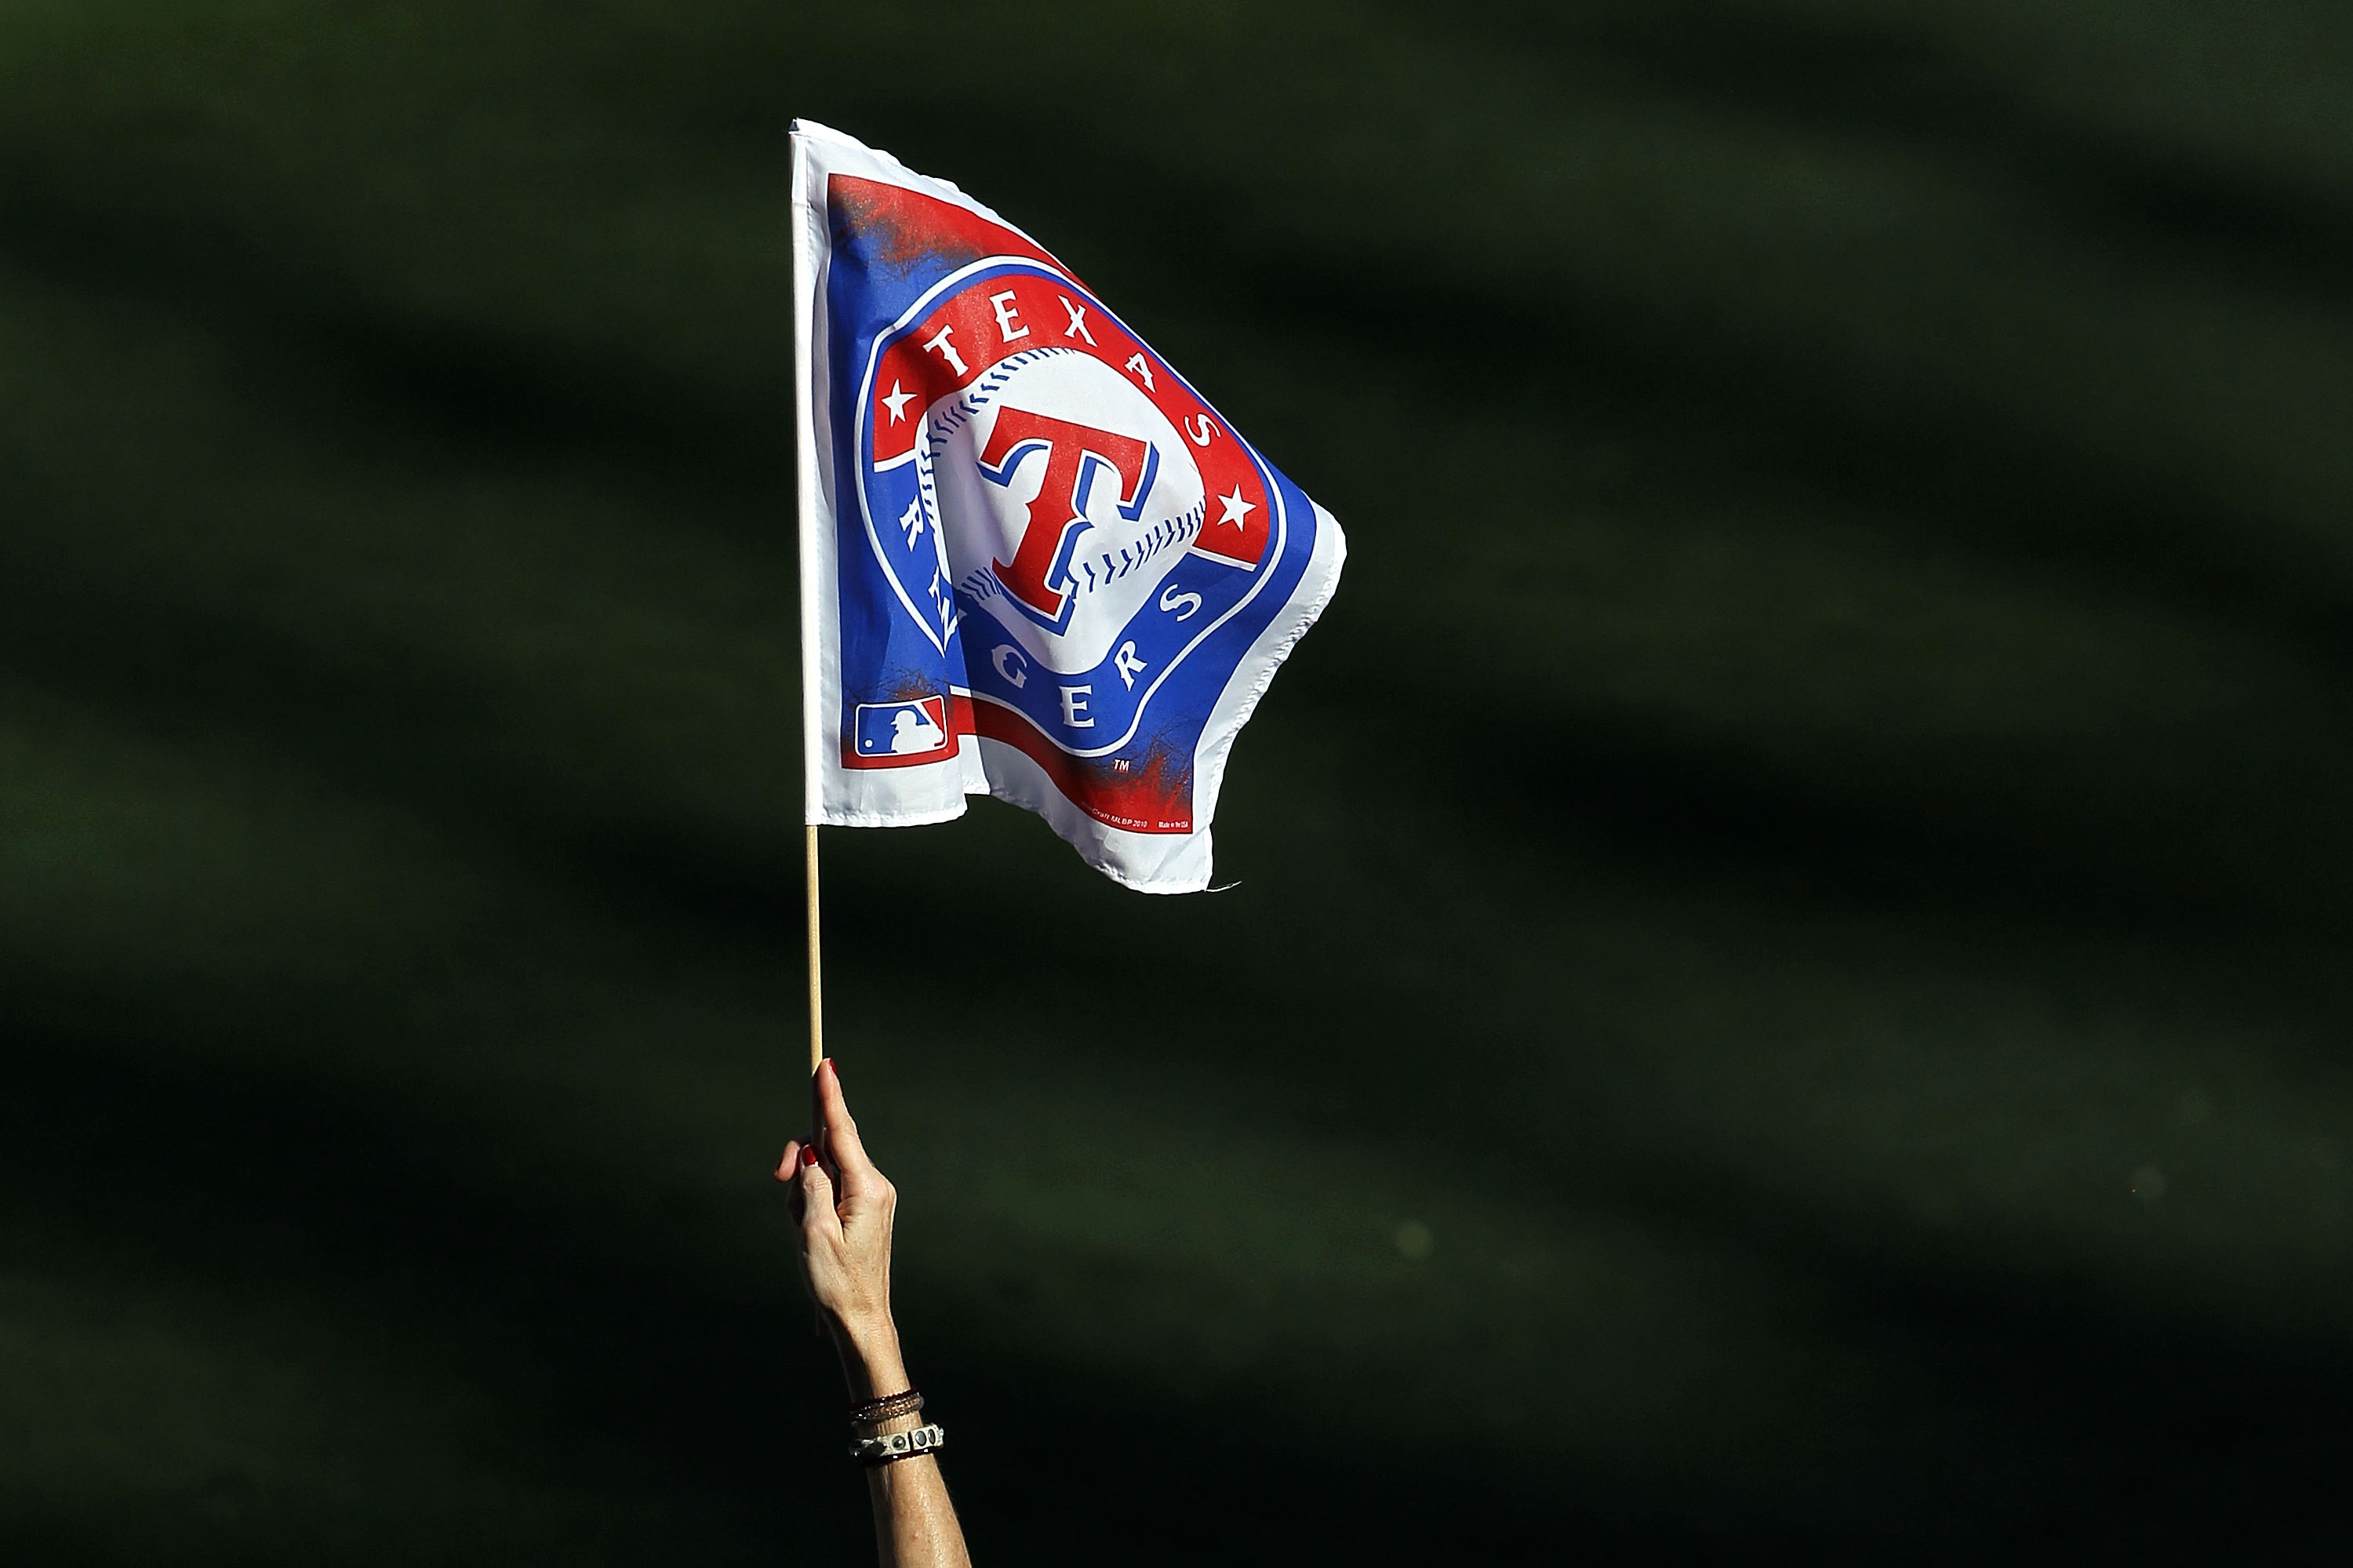 ARLINGTON, TX - OCTOBER 30:  A fan of the Texas Rangers holds up a Rangers' flag against the San Francisco Giants in Game Three of the 2010 MLB World Series at Rangers Ballpark in Arlington on October 30, 2010 in Arlington, Texas.  (Photo by Ronald Martin